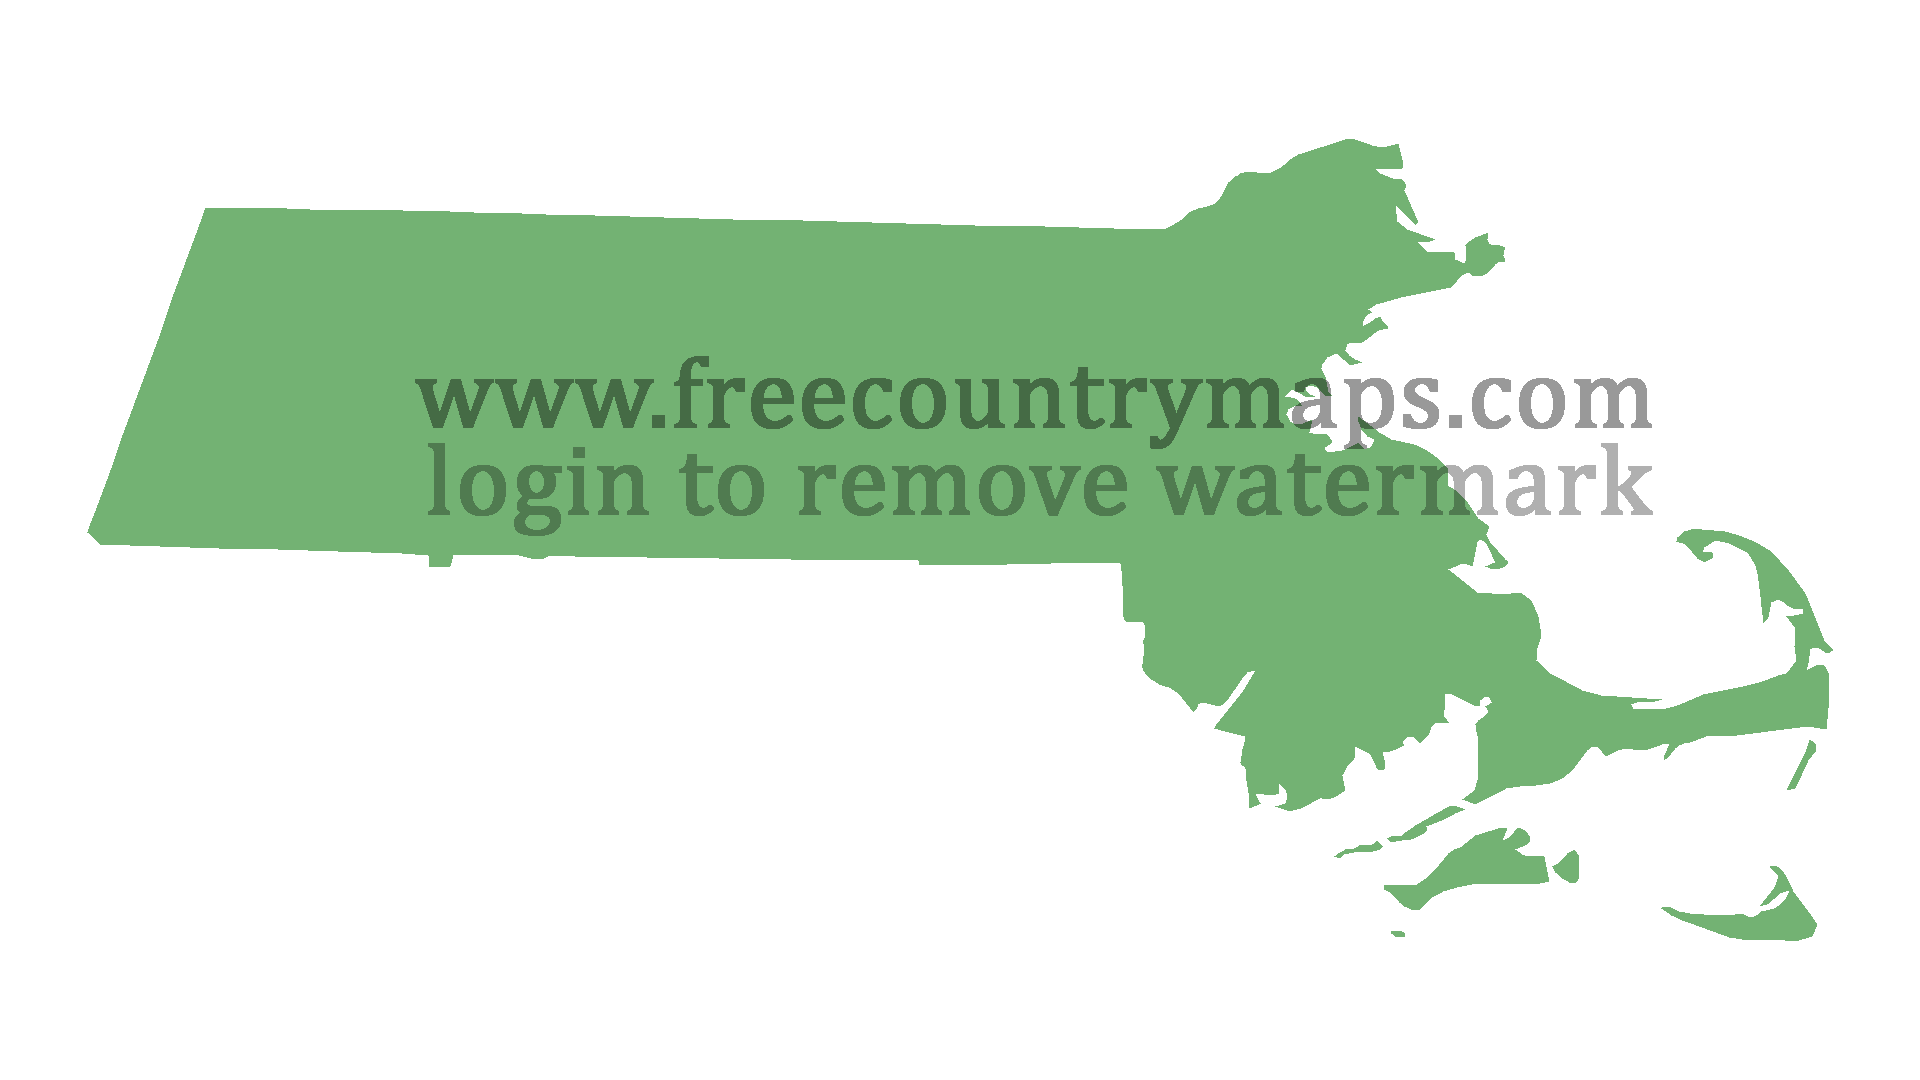 Blank Map of the State of Massachusetts in 1080p